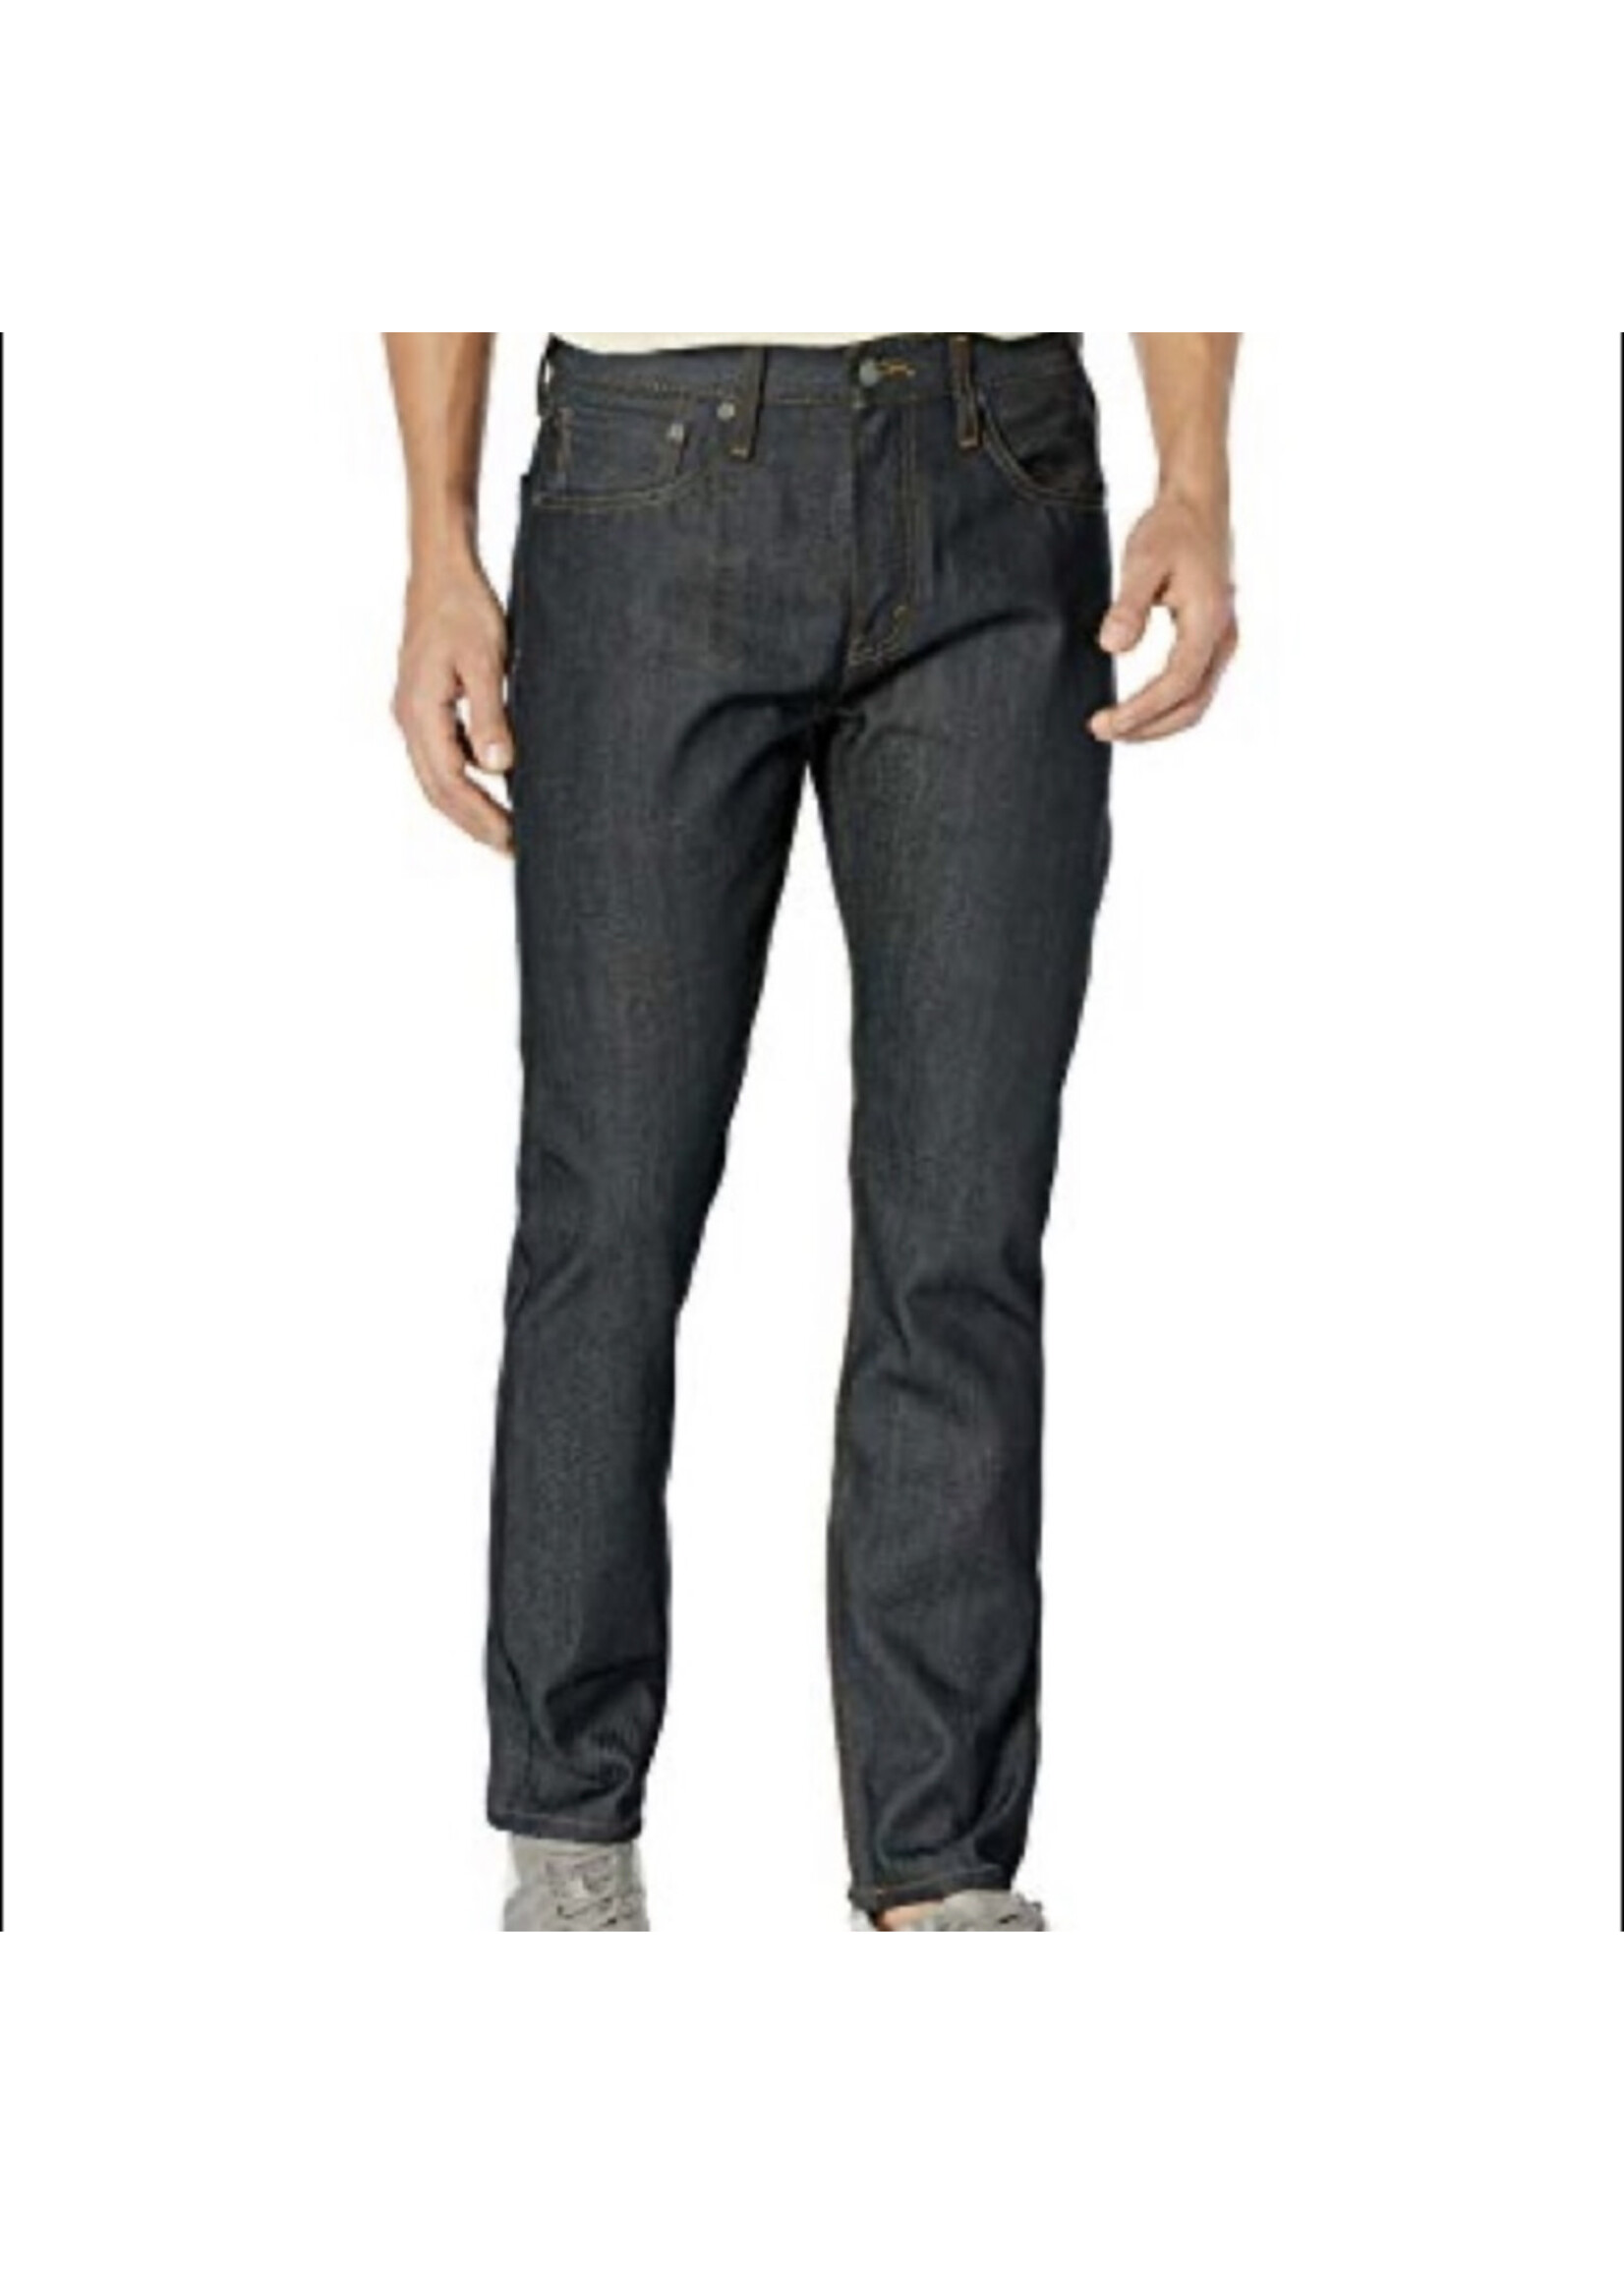 Levi Levi's 502 Tapered Jeans, 28